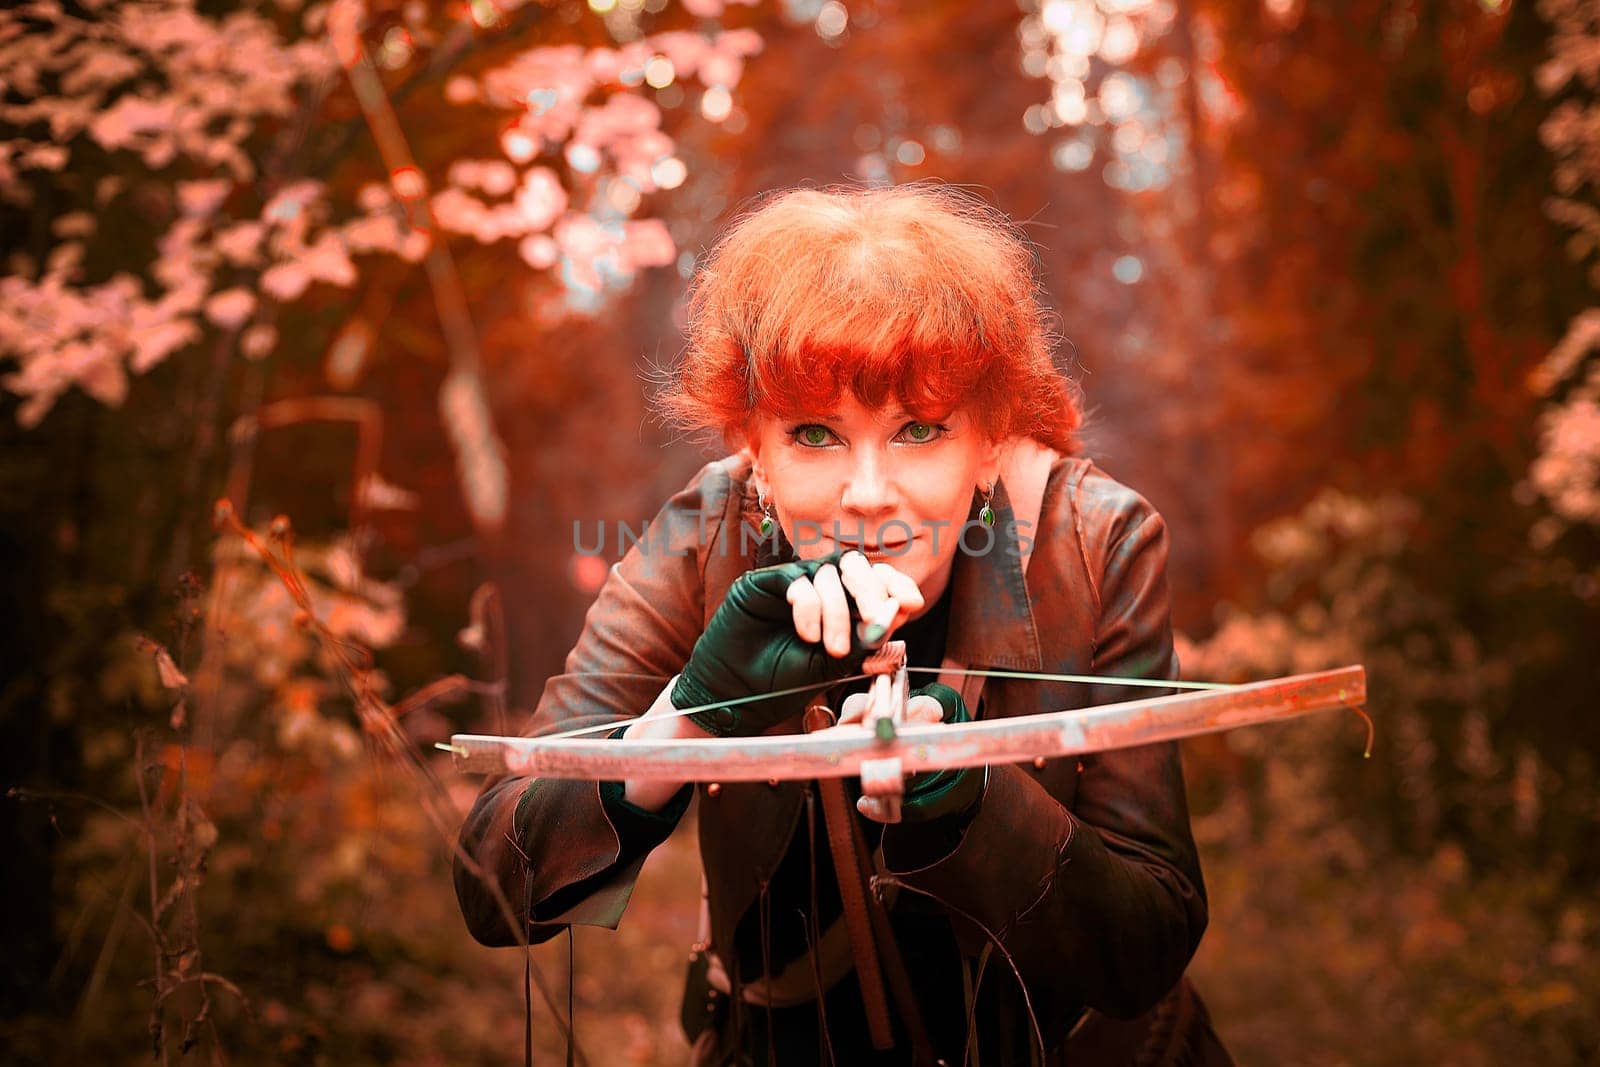 Mature model portraying a royal huntress with red curve hair is hunting with a crossbow in the in vibrant autumn forest in thematic photo shoot